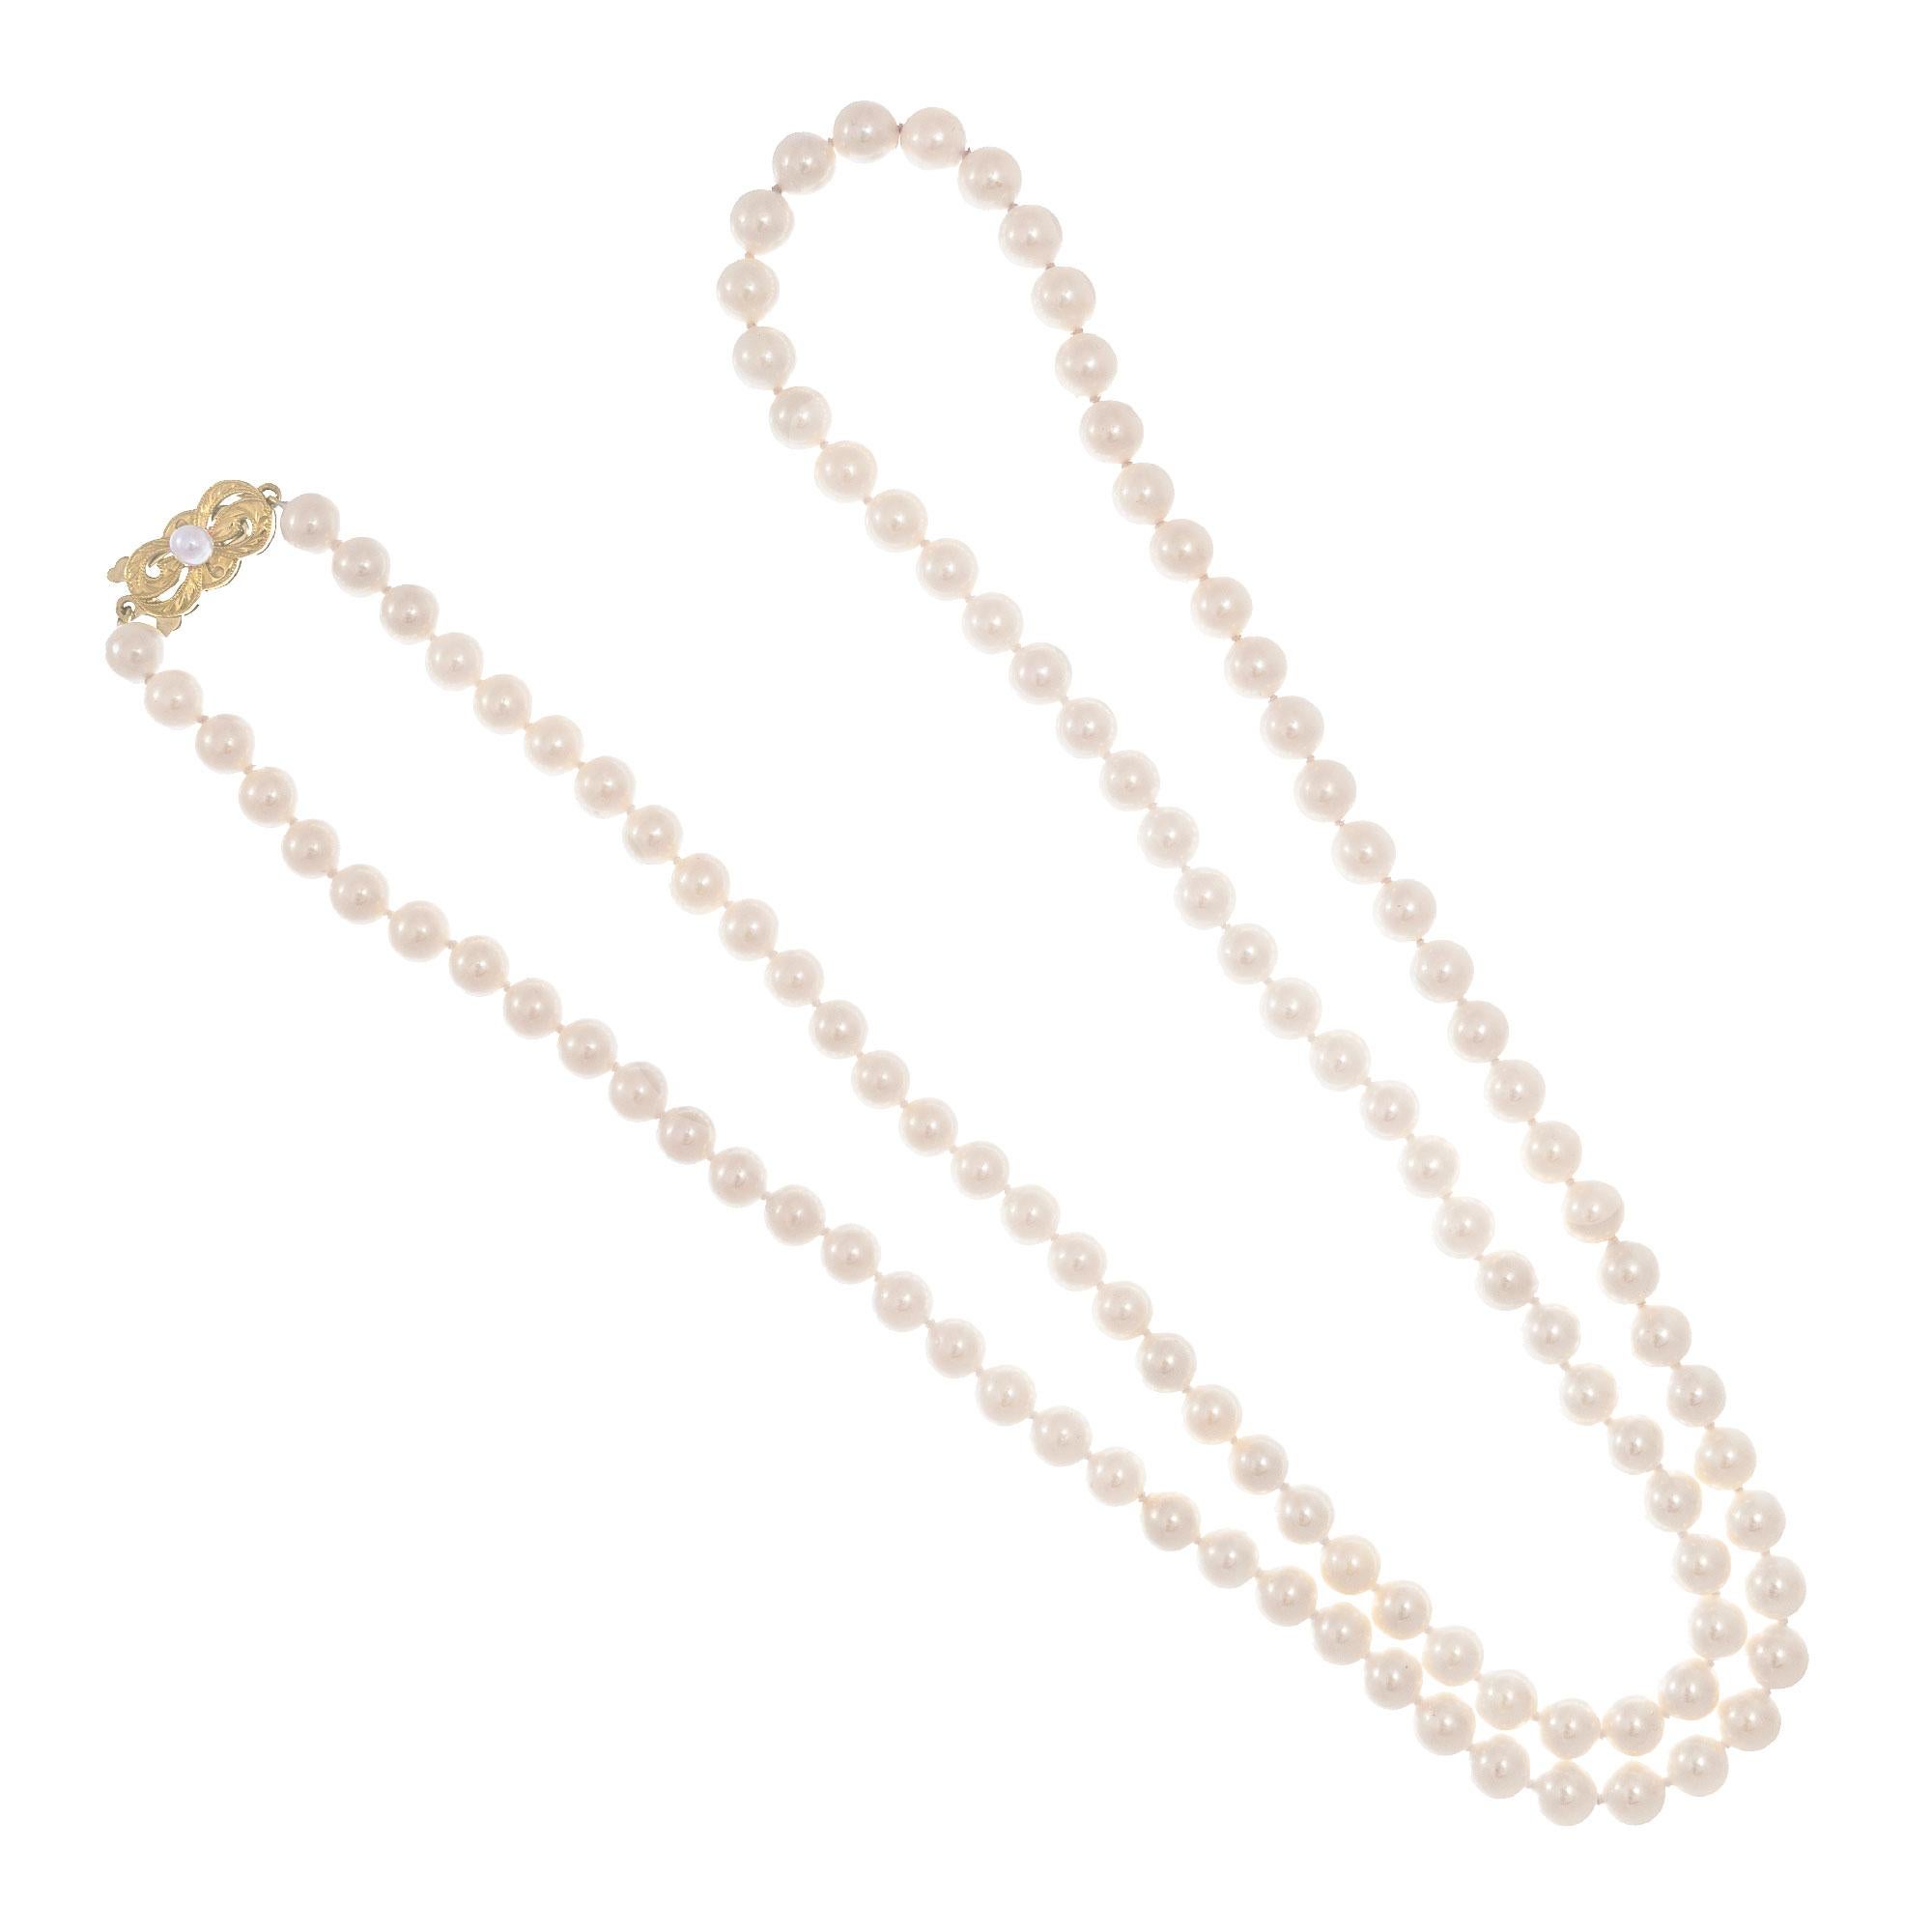 Mikimoto 6 to 6.5mm Akoya cultured pearl necklace. 30 inches with an 18k  yellow gold clasp. 

114 Cultured pearls, 6-6.5mm 
1 Cultured pearl 3.25
Length: 30 inches
Tested 18k gold
Stamped: 750
Hallmark: M 
Weight: 41.5